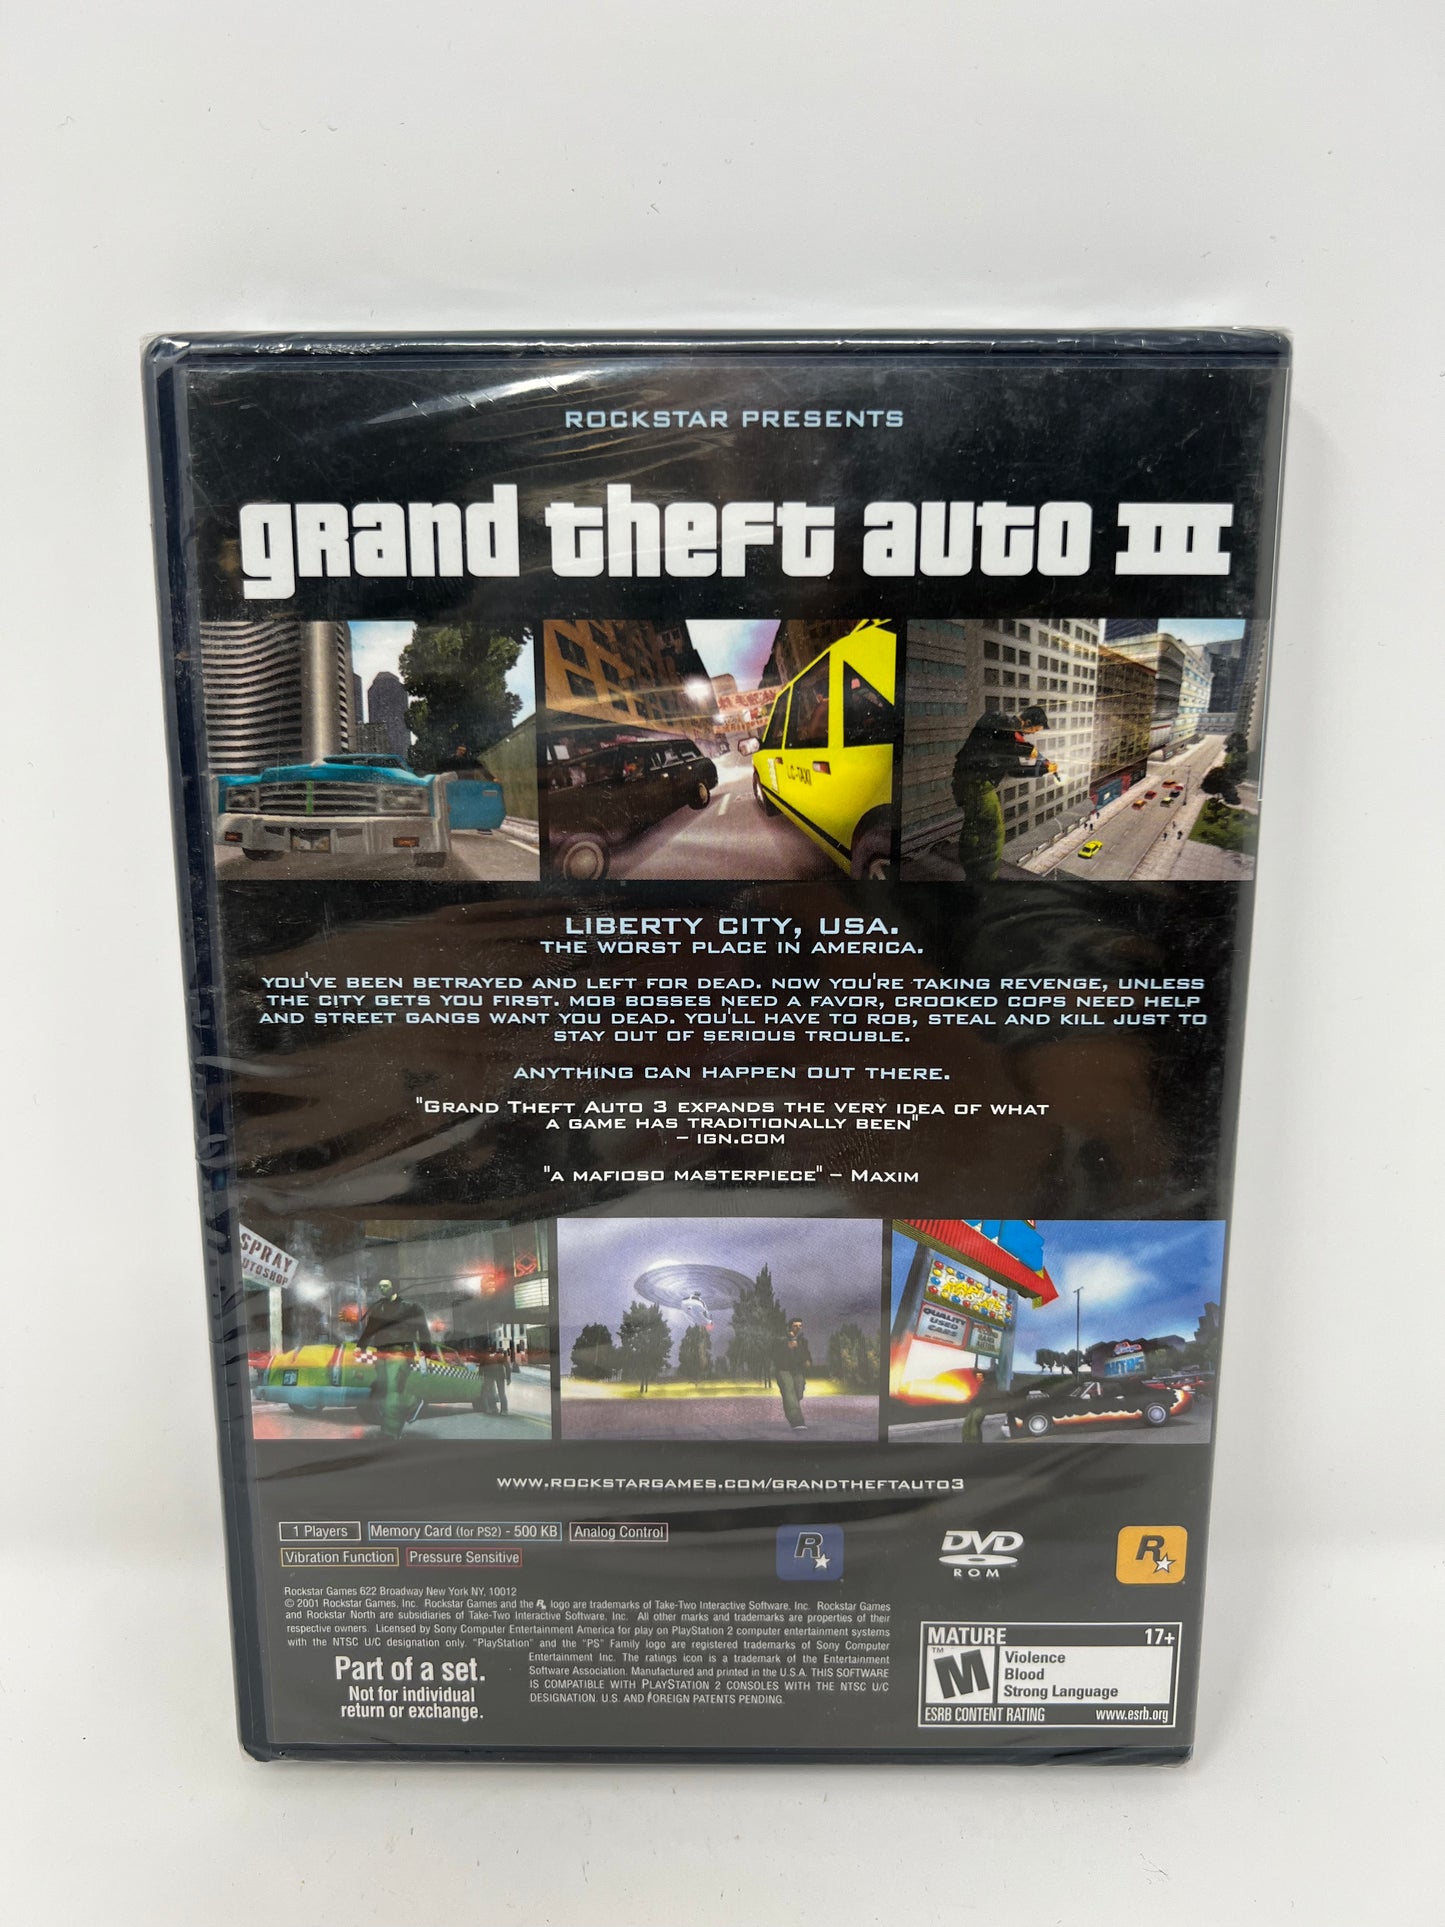 Grand Theft Auto III - PS2 Game - New